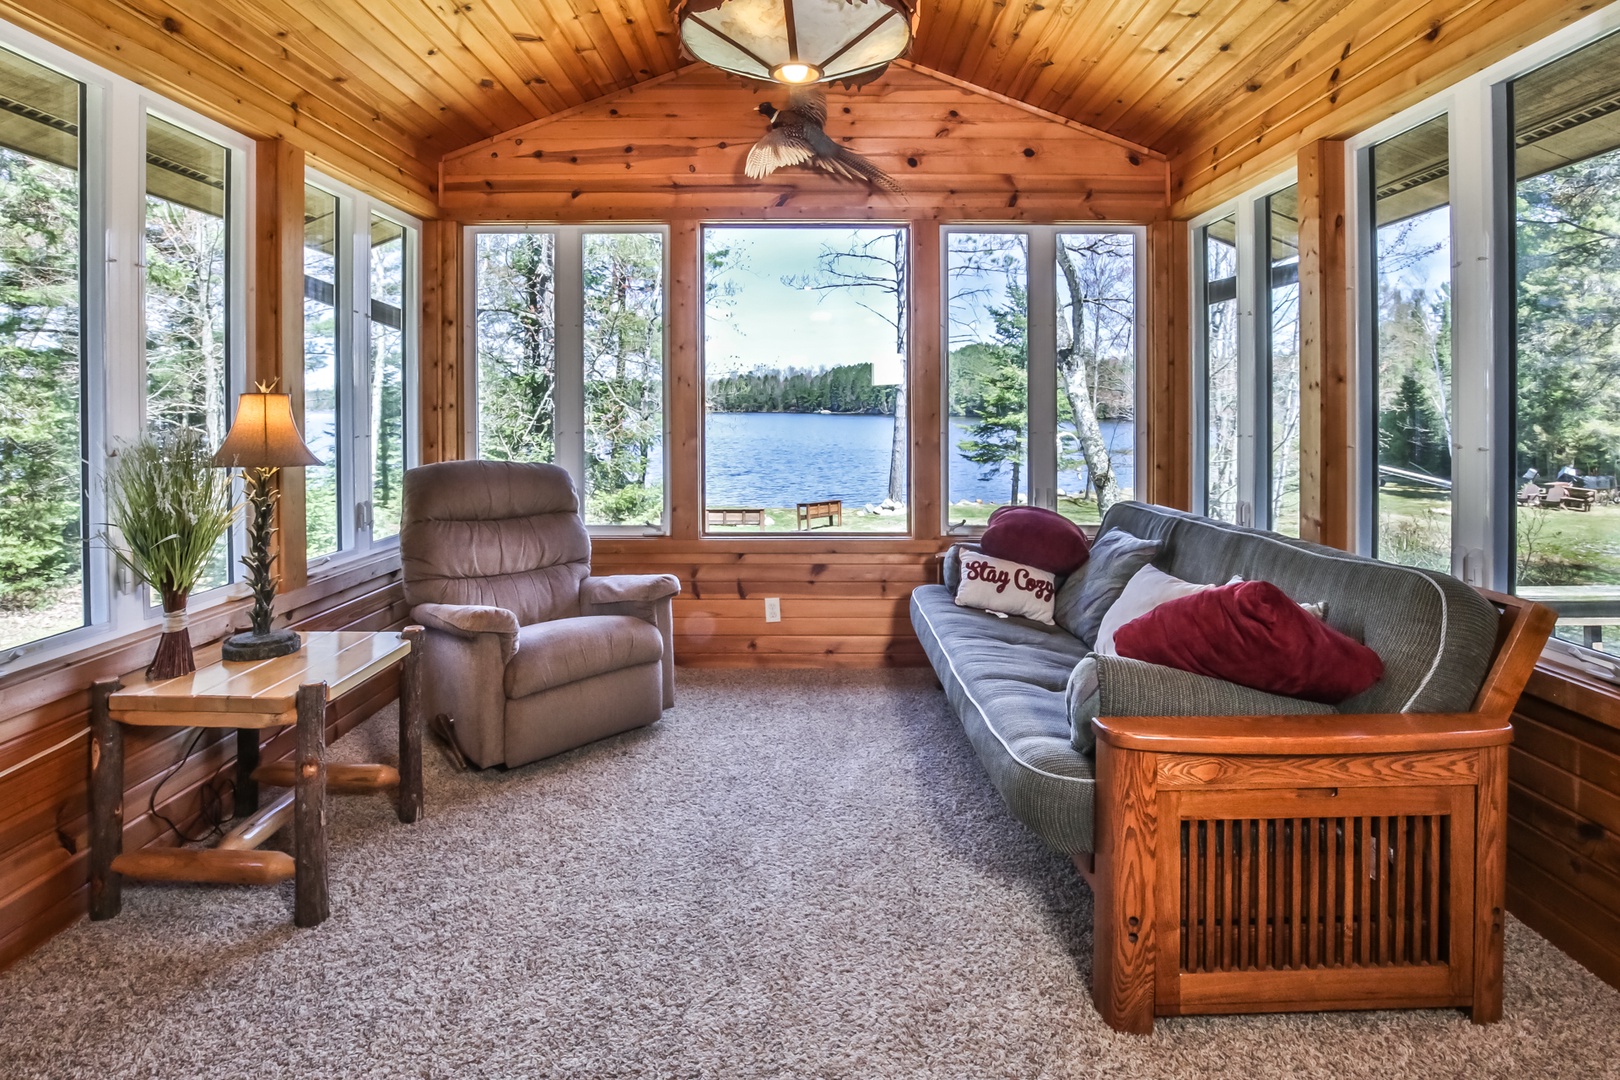 Knotty Pines - Hiller Vacation Homes